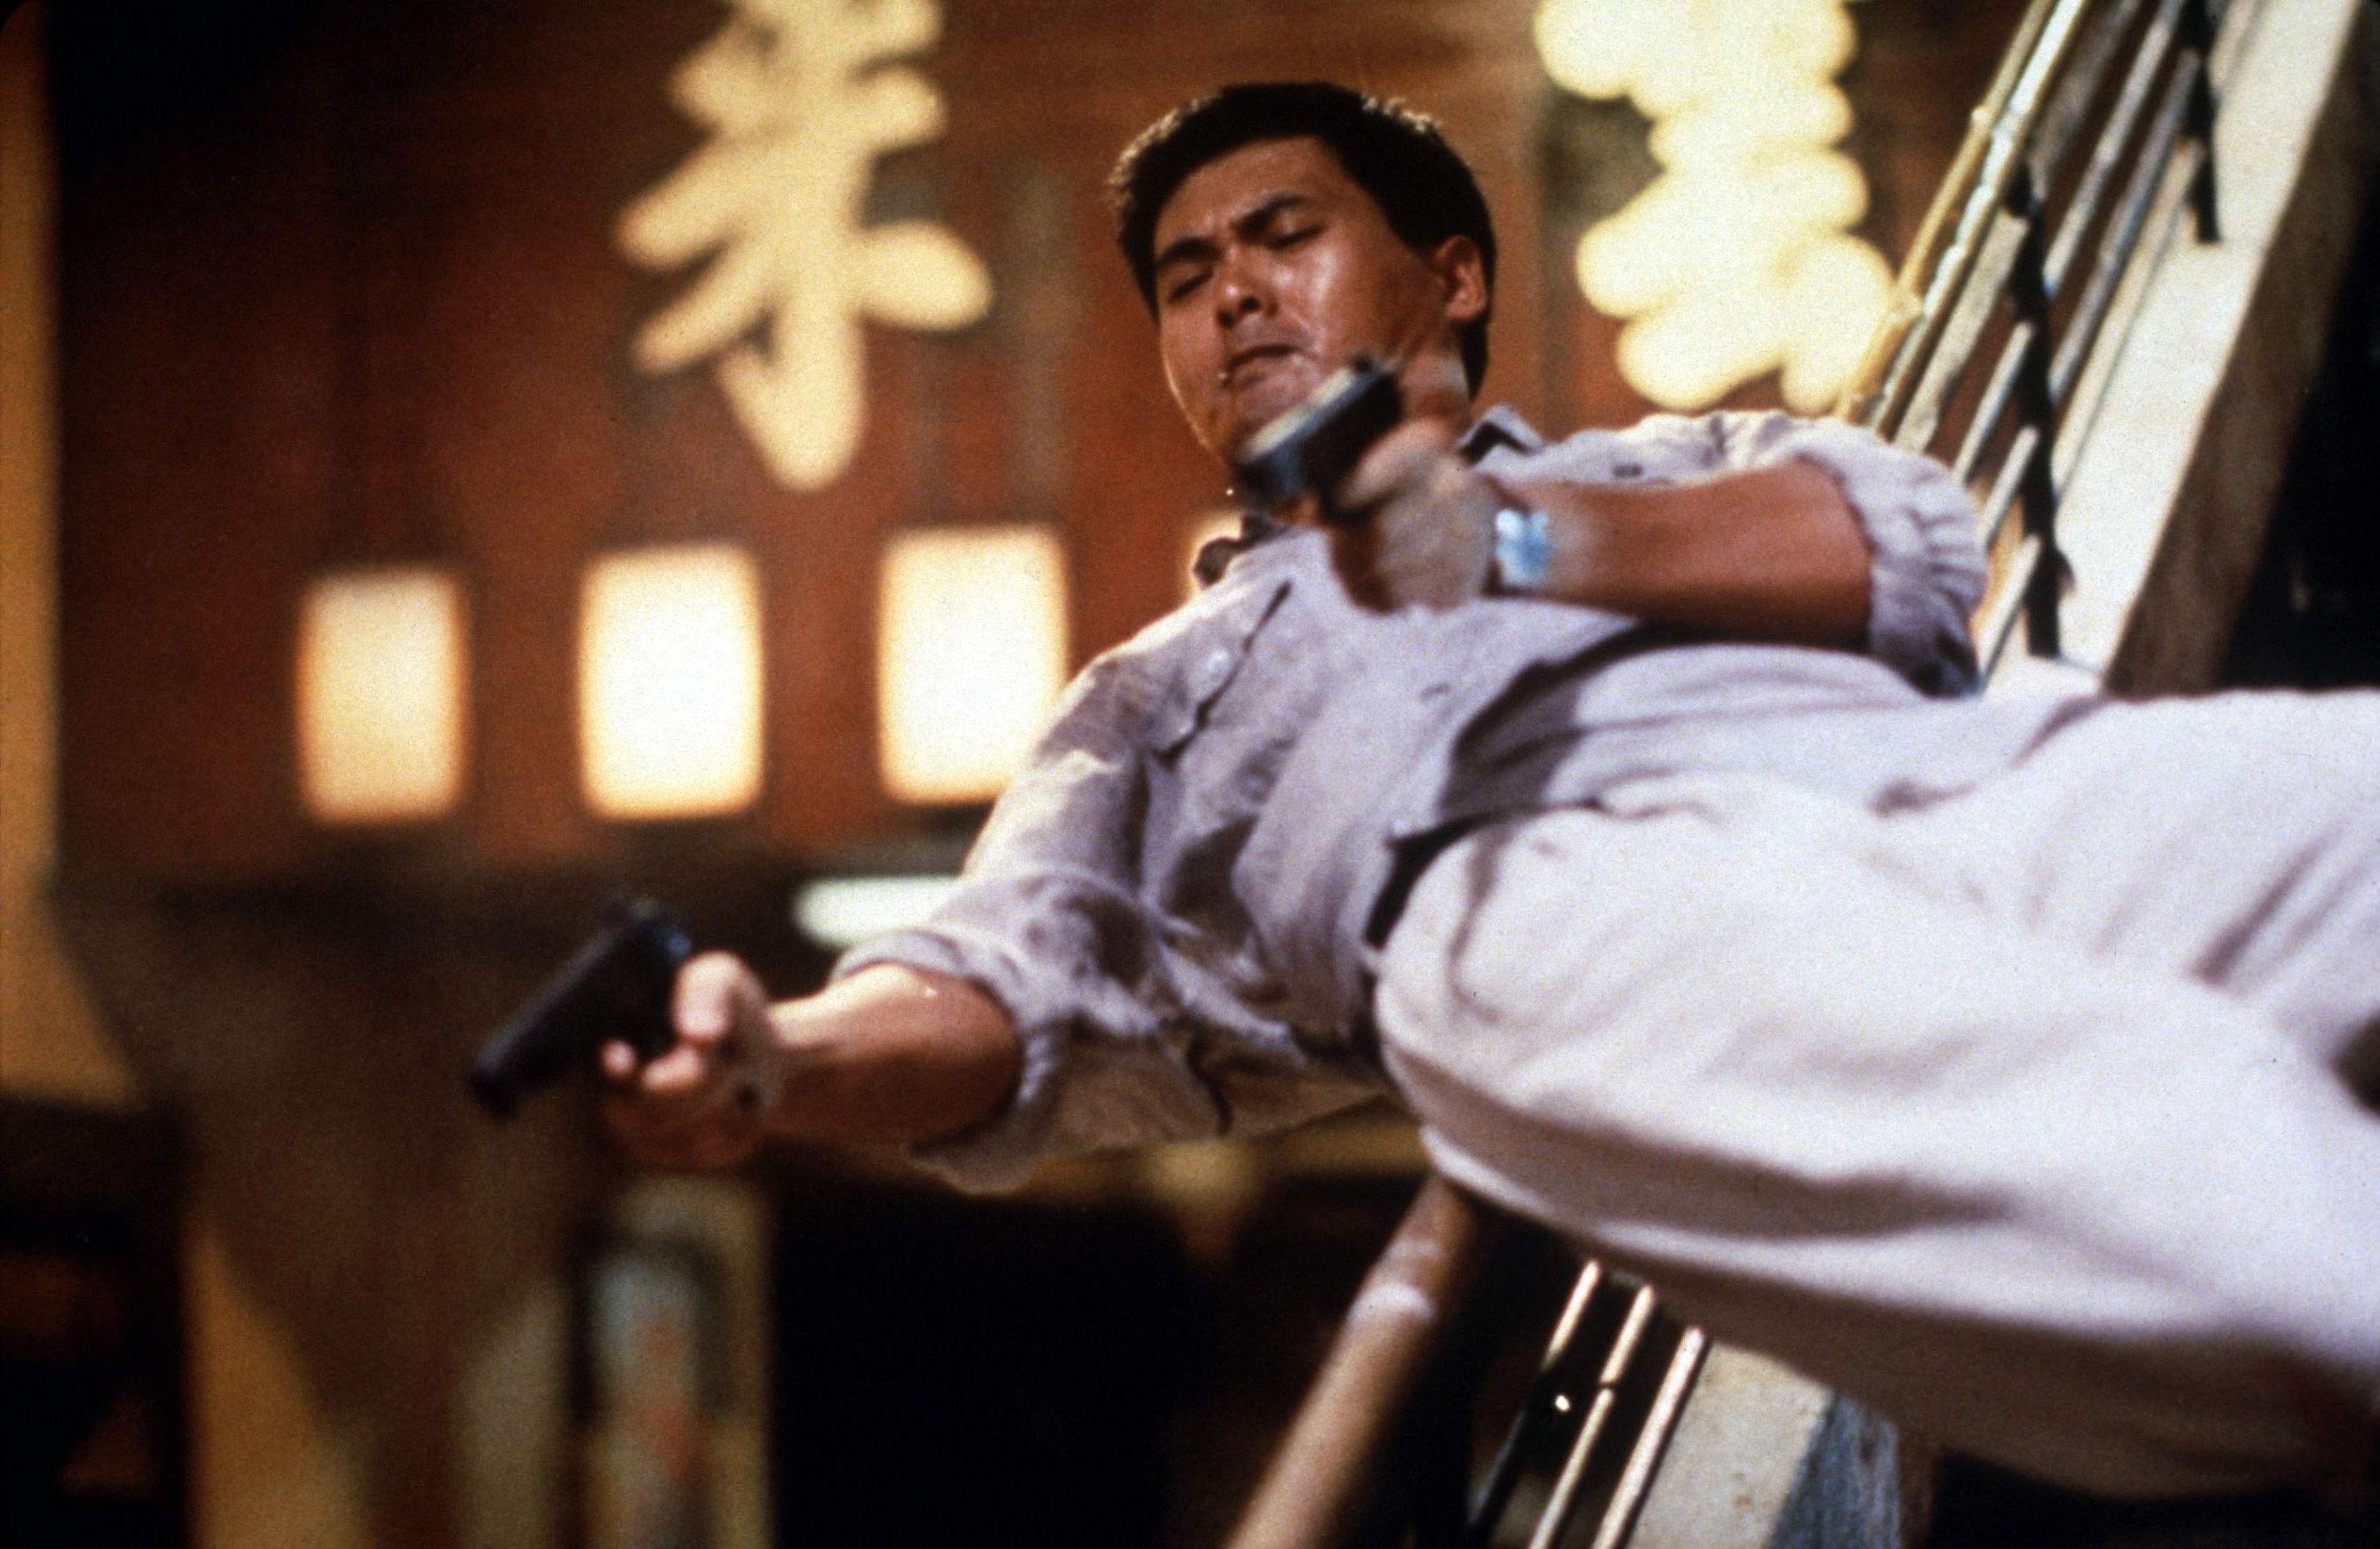 Chow Yun Fat in "Hardboiled" (used without permission)